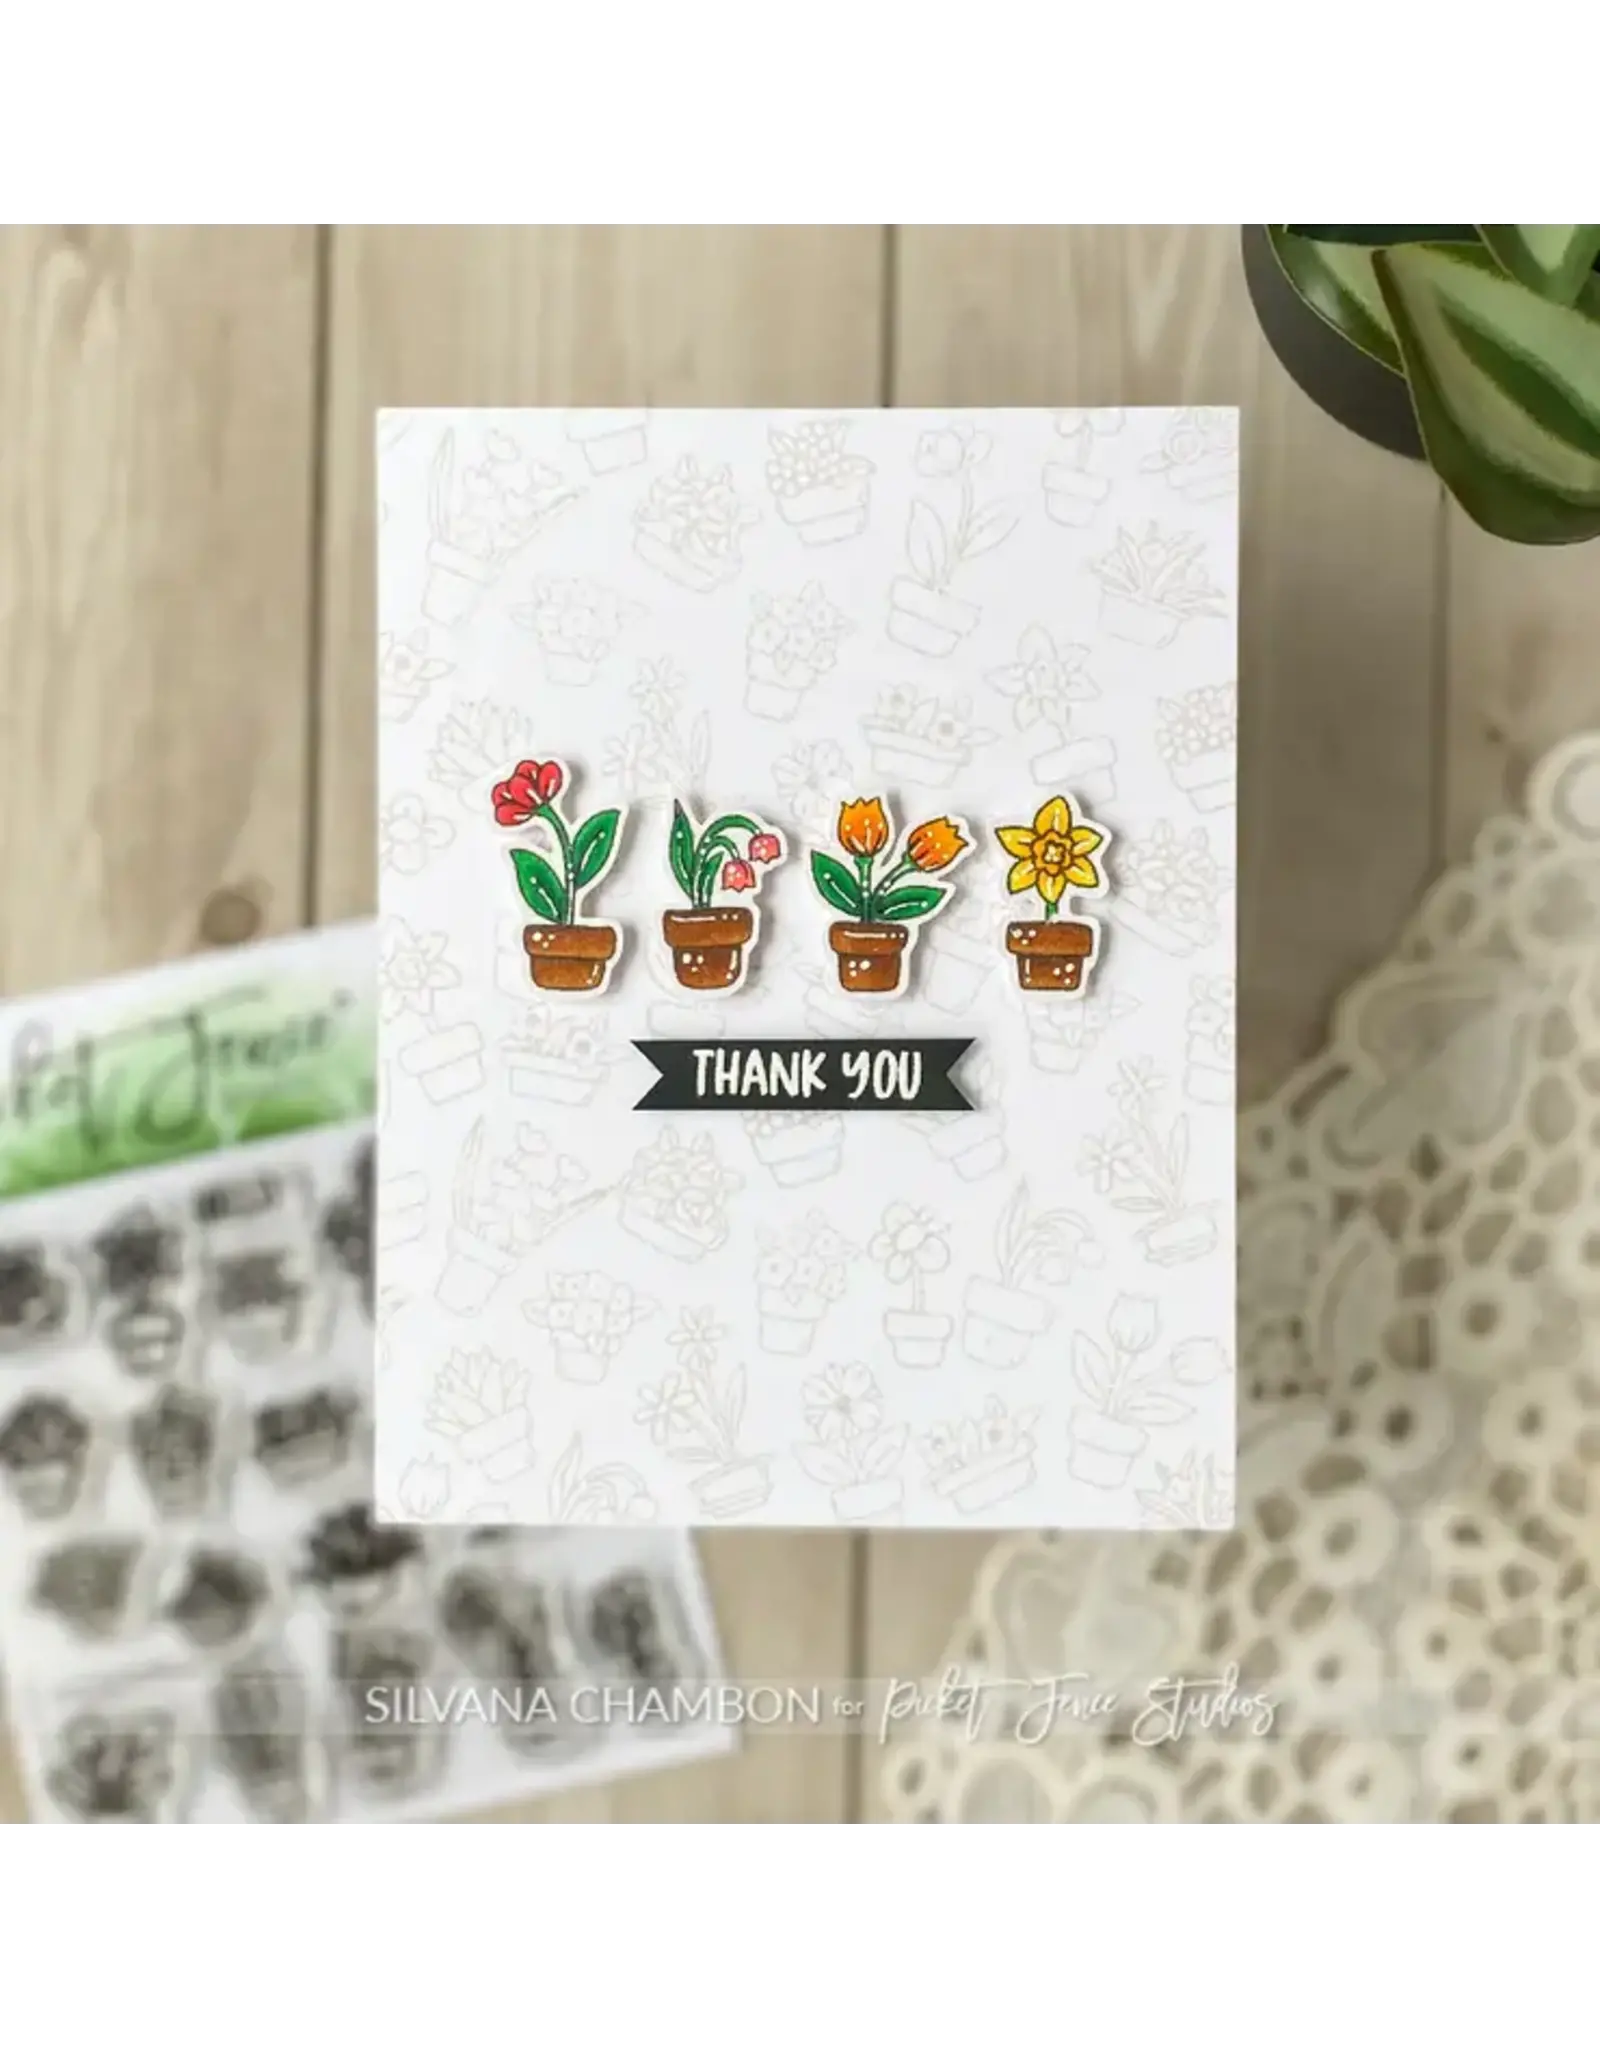 PICKET FENCE PICKET FENCE STUDIOS WREATH BUILDING: POTTED PLANTS CLEAR STAMP SET